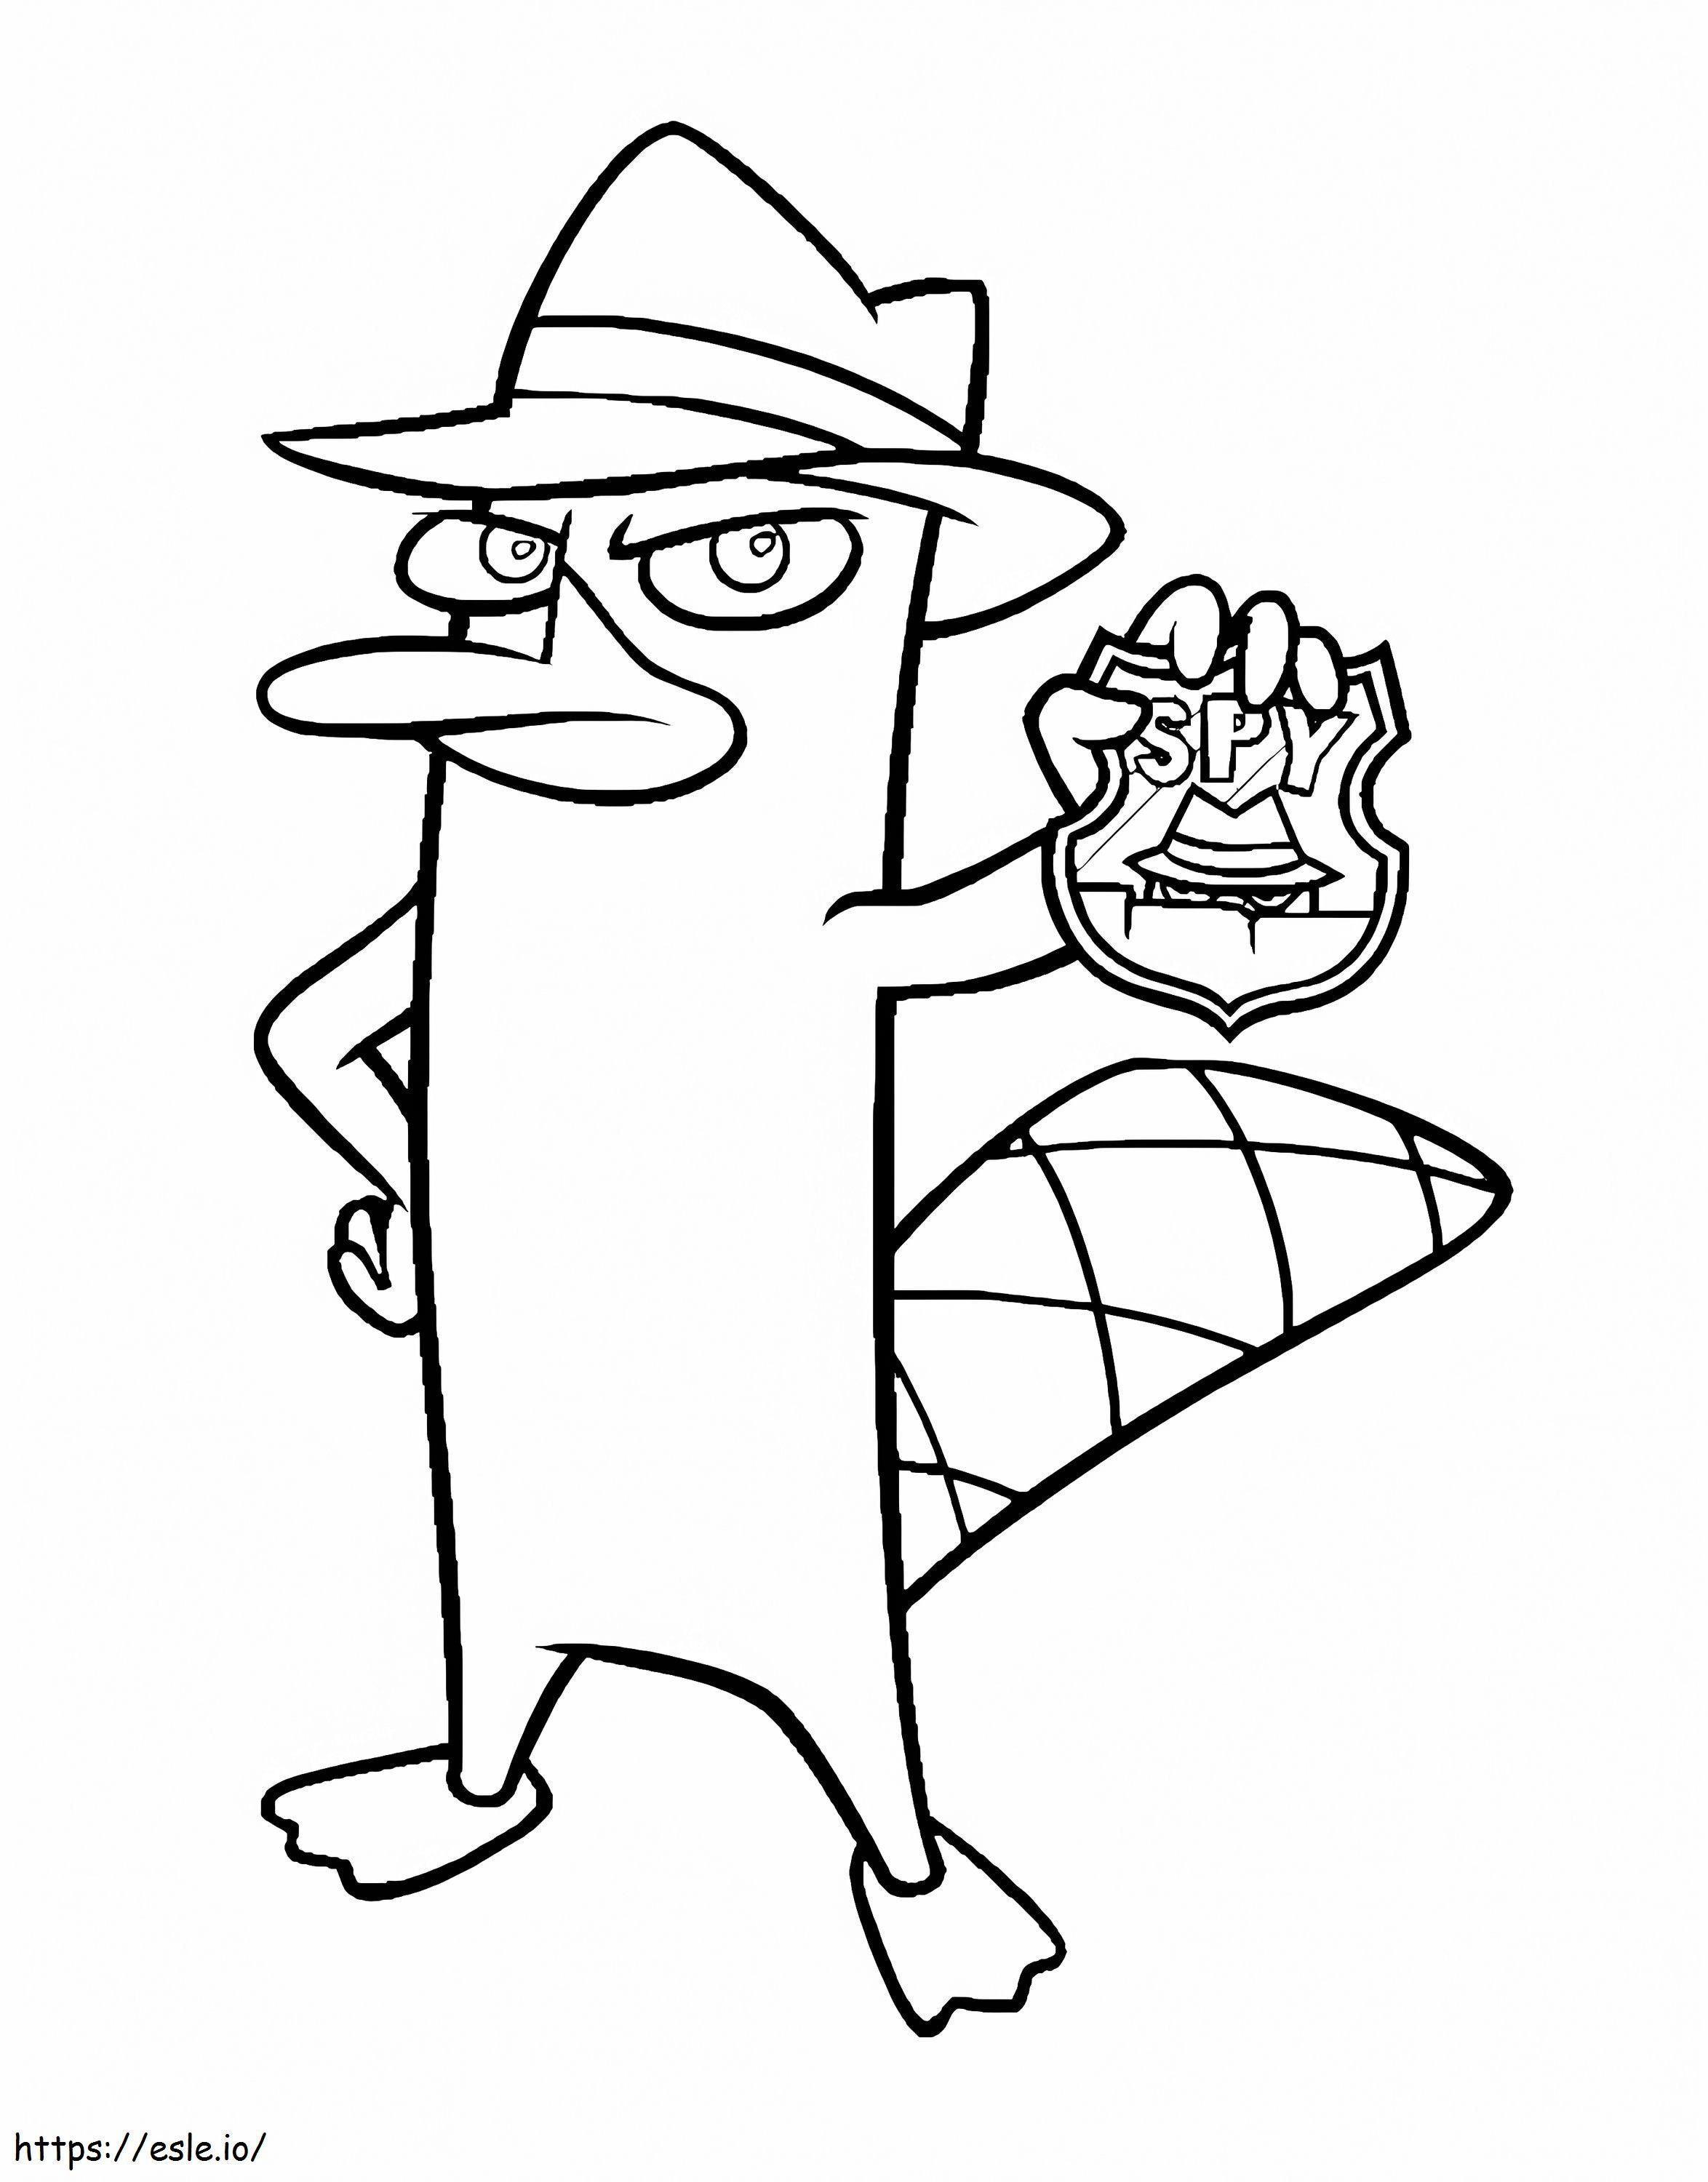 1547776911 Phineas And Ferb Perry The Platypus coloring page